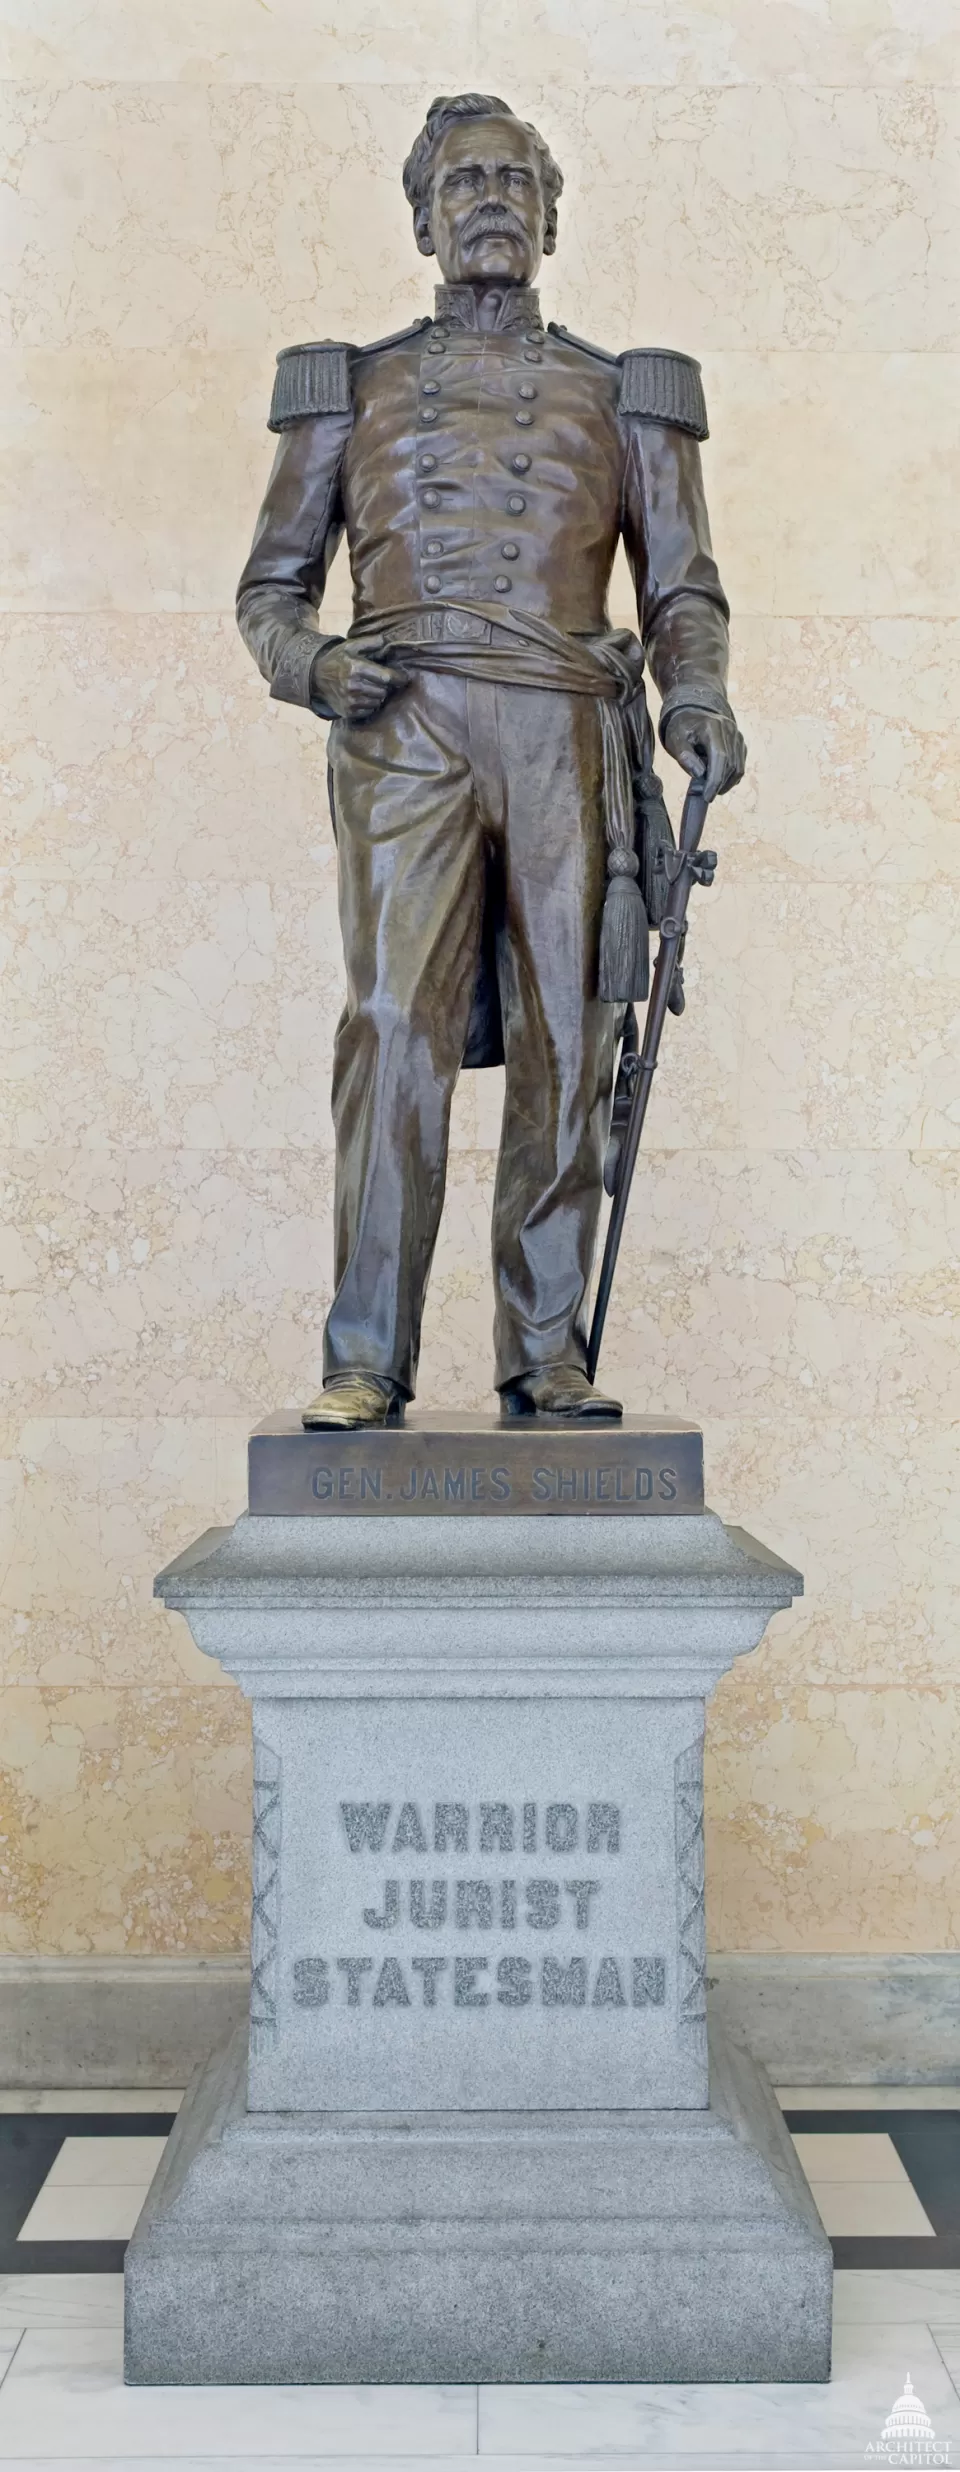 This statue of James Shields was given to the National Statuary Hall Collection by Illinois in 1893.